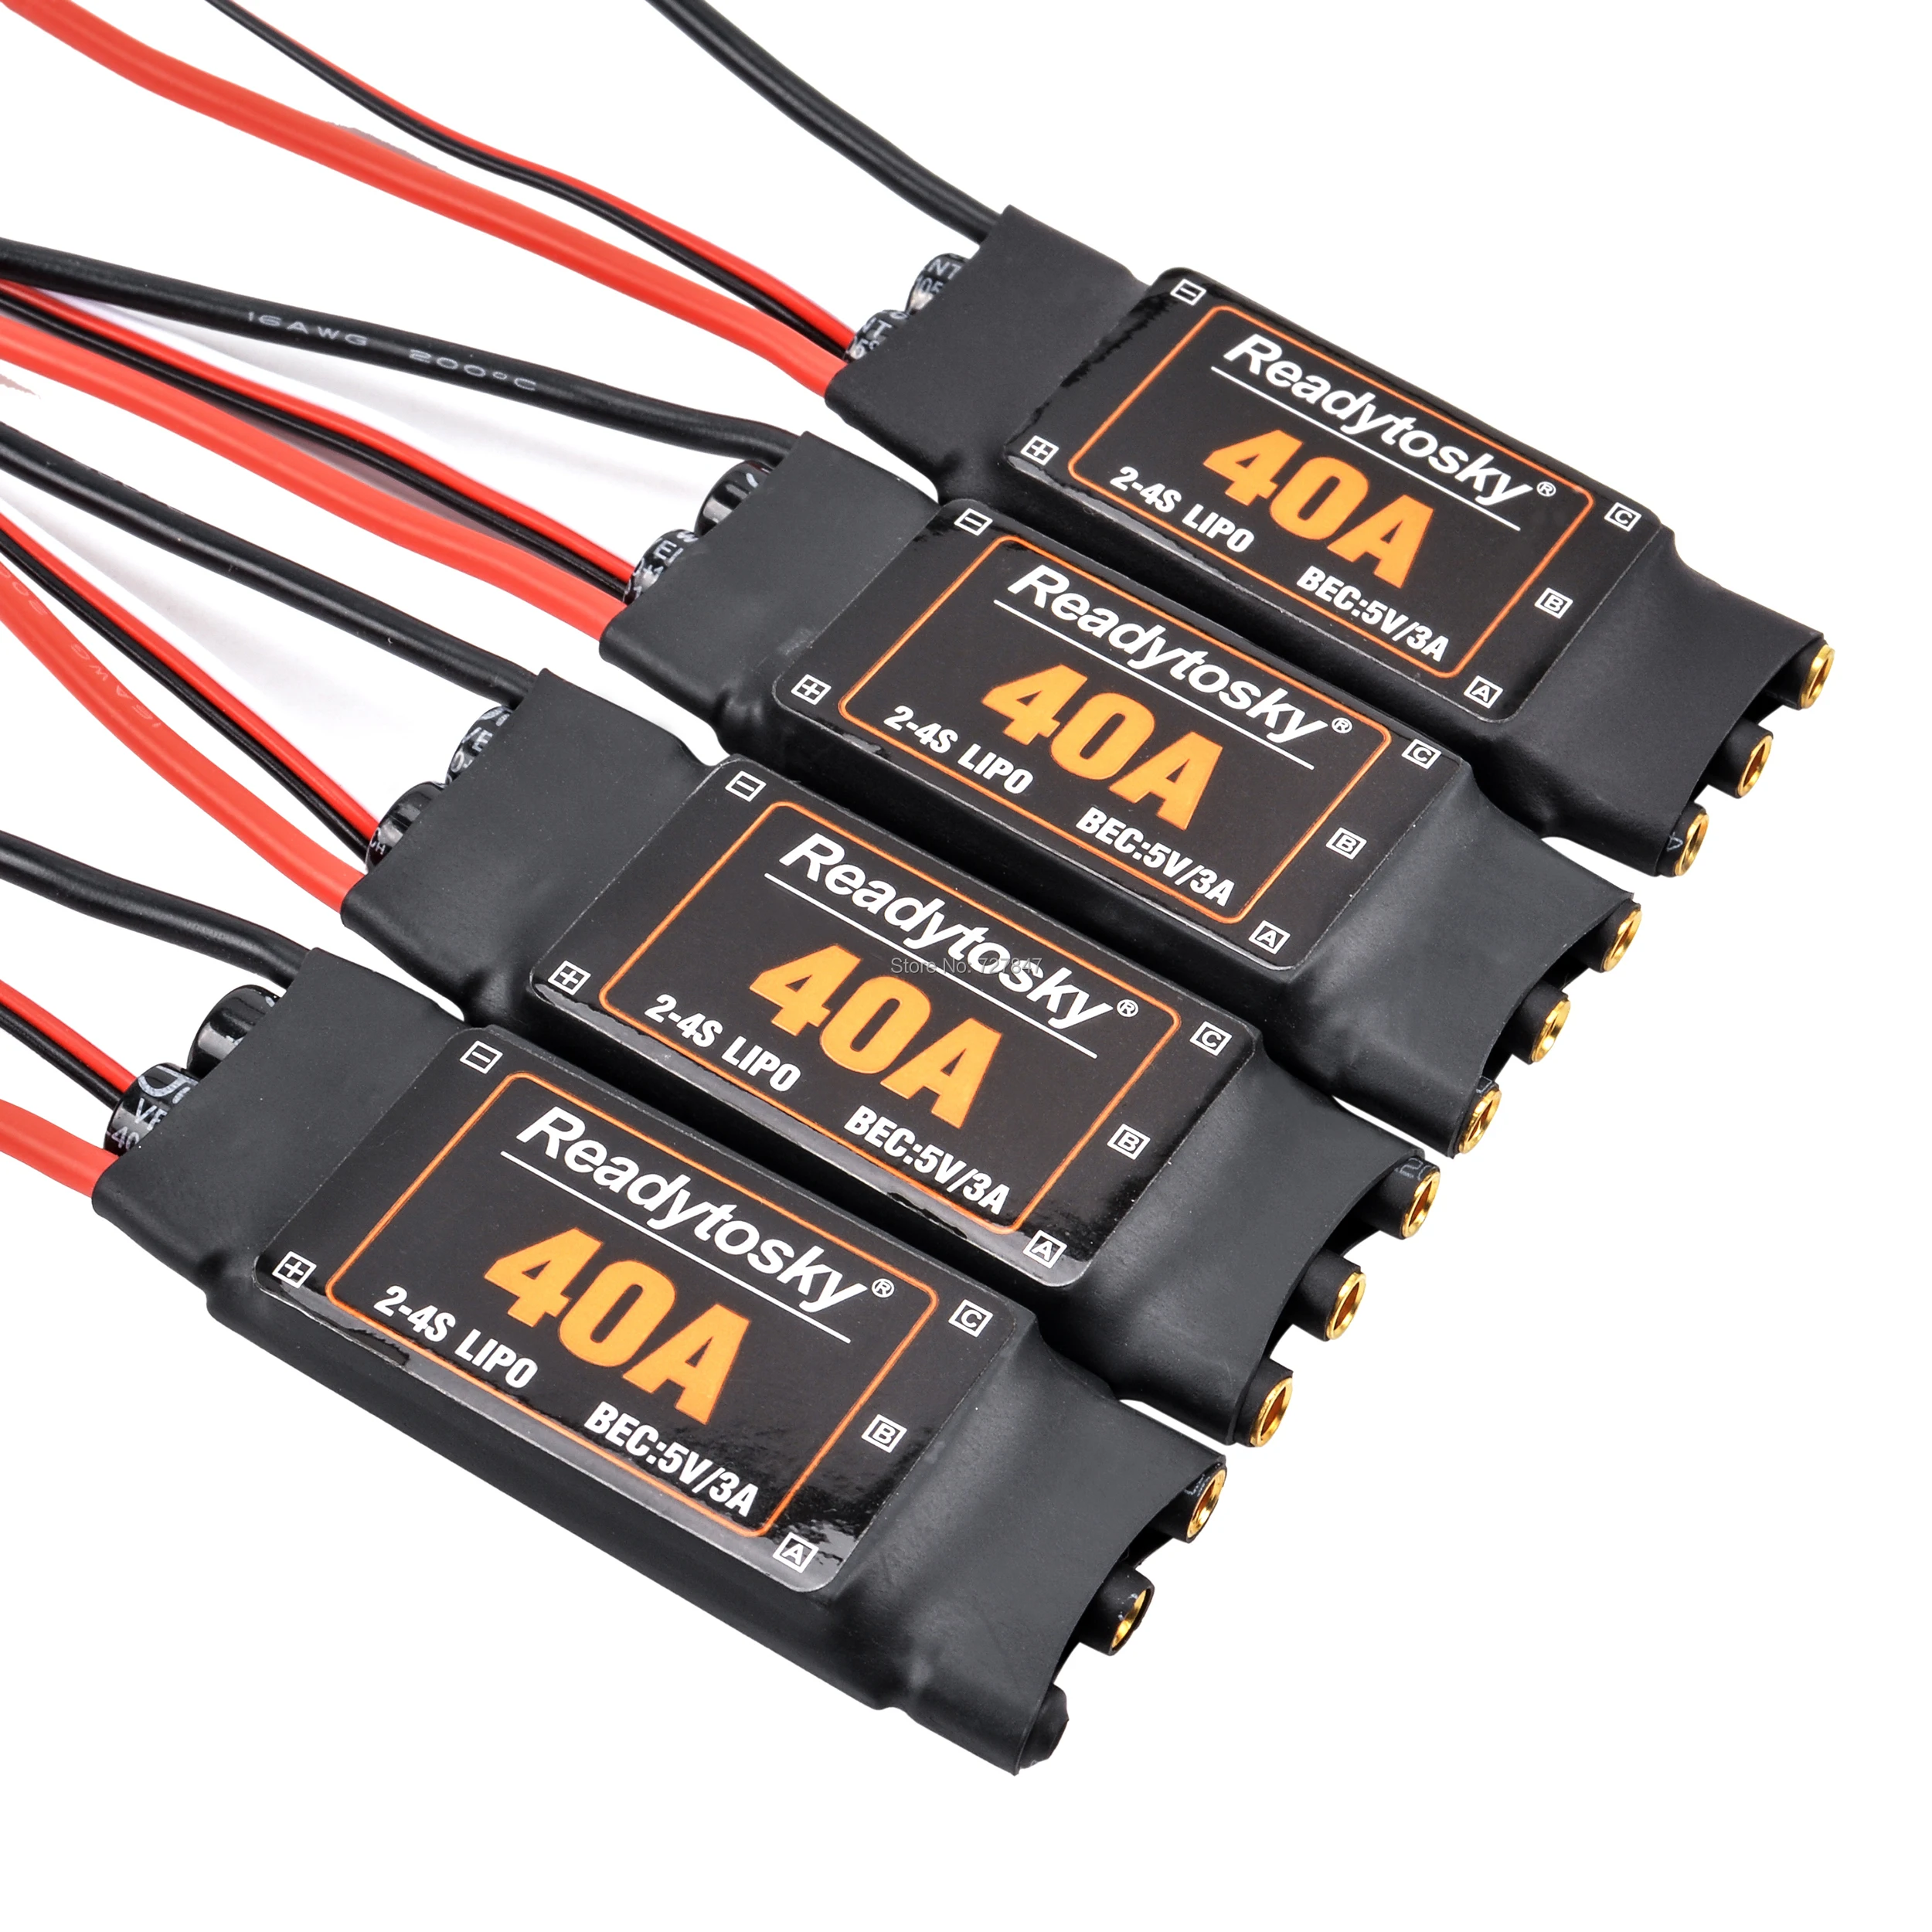 40A 40AMP 2-3S Brushless ESC Speed Control 5V 3A BEC for RC Airplane Parts 